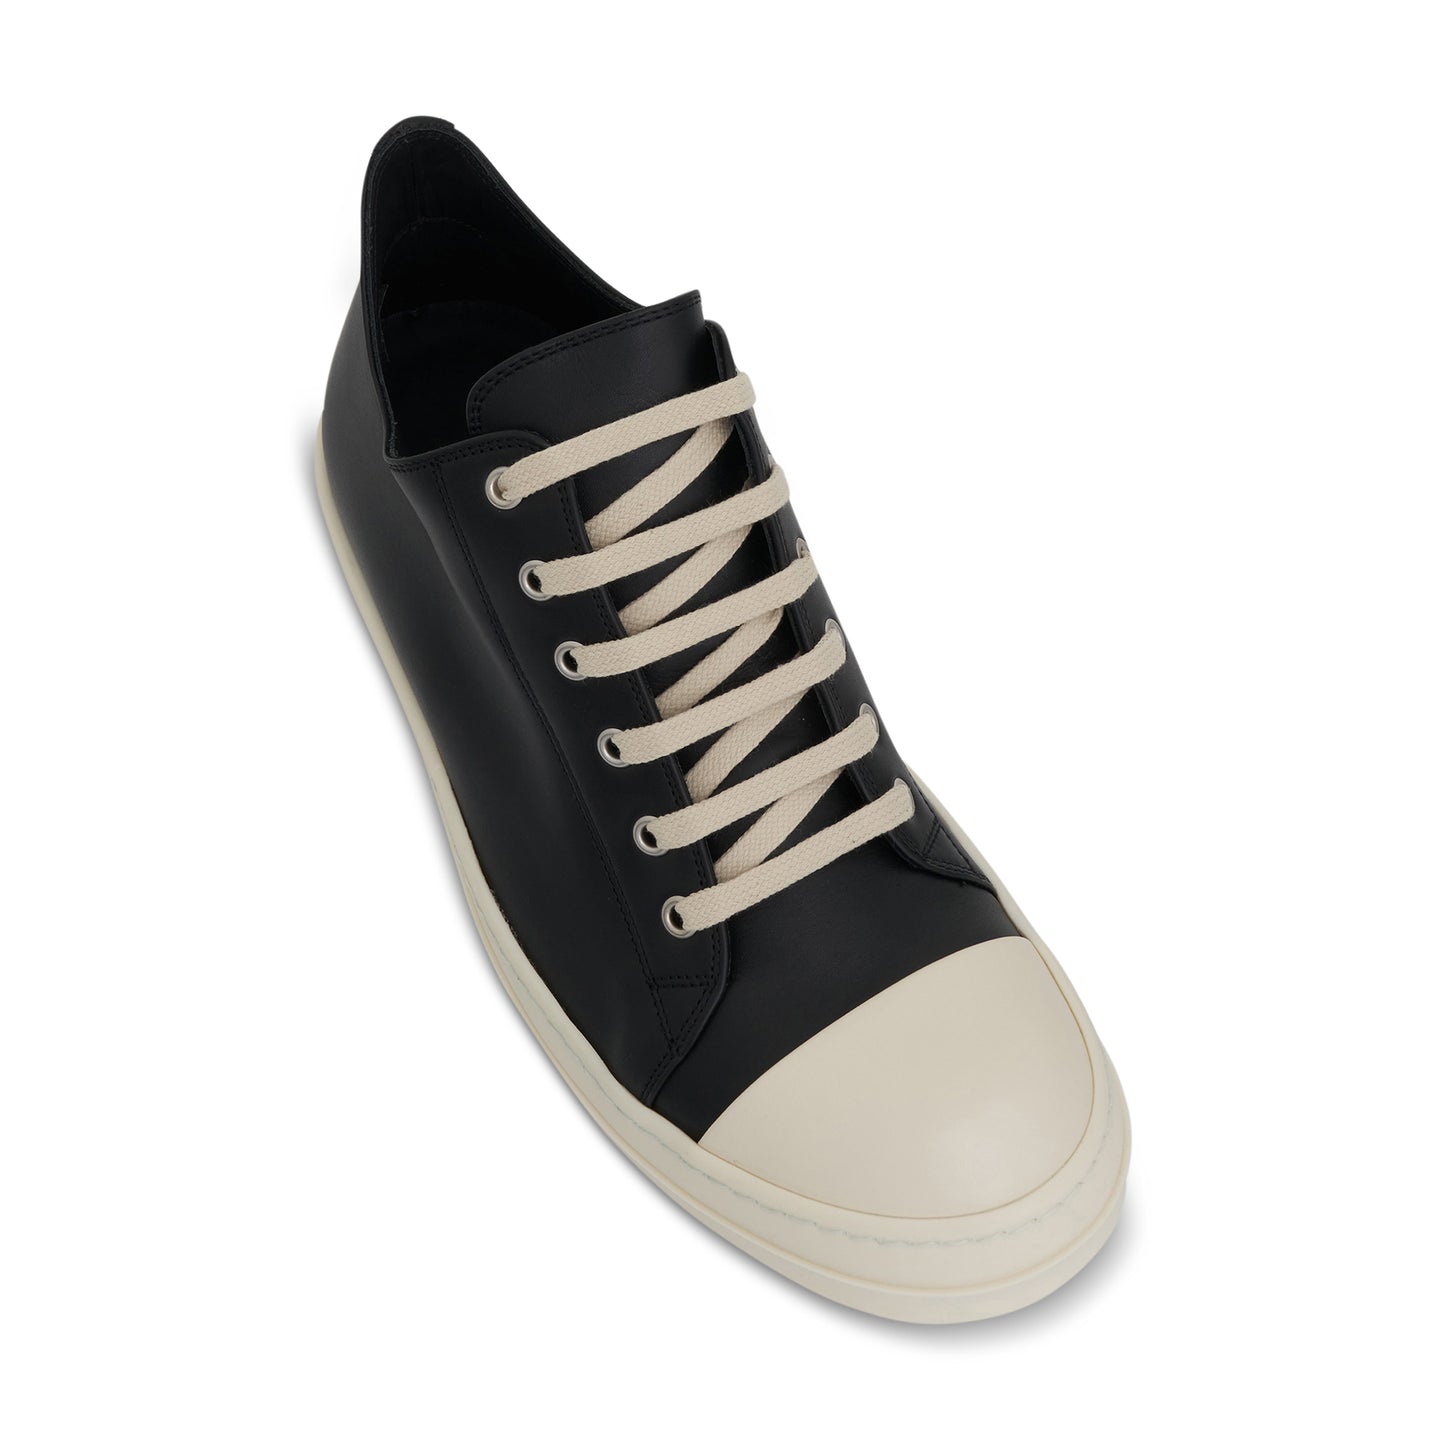 Classic Low Leather Sneakers in Black/Milk